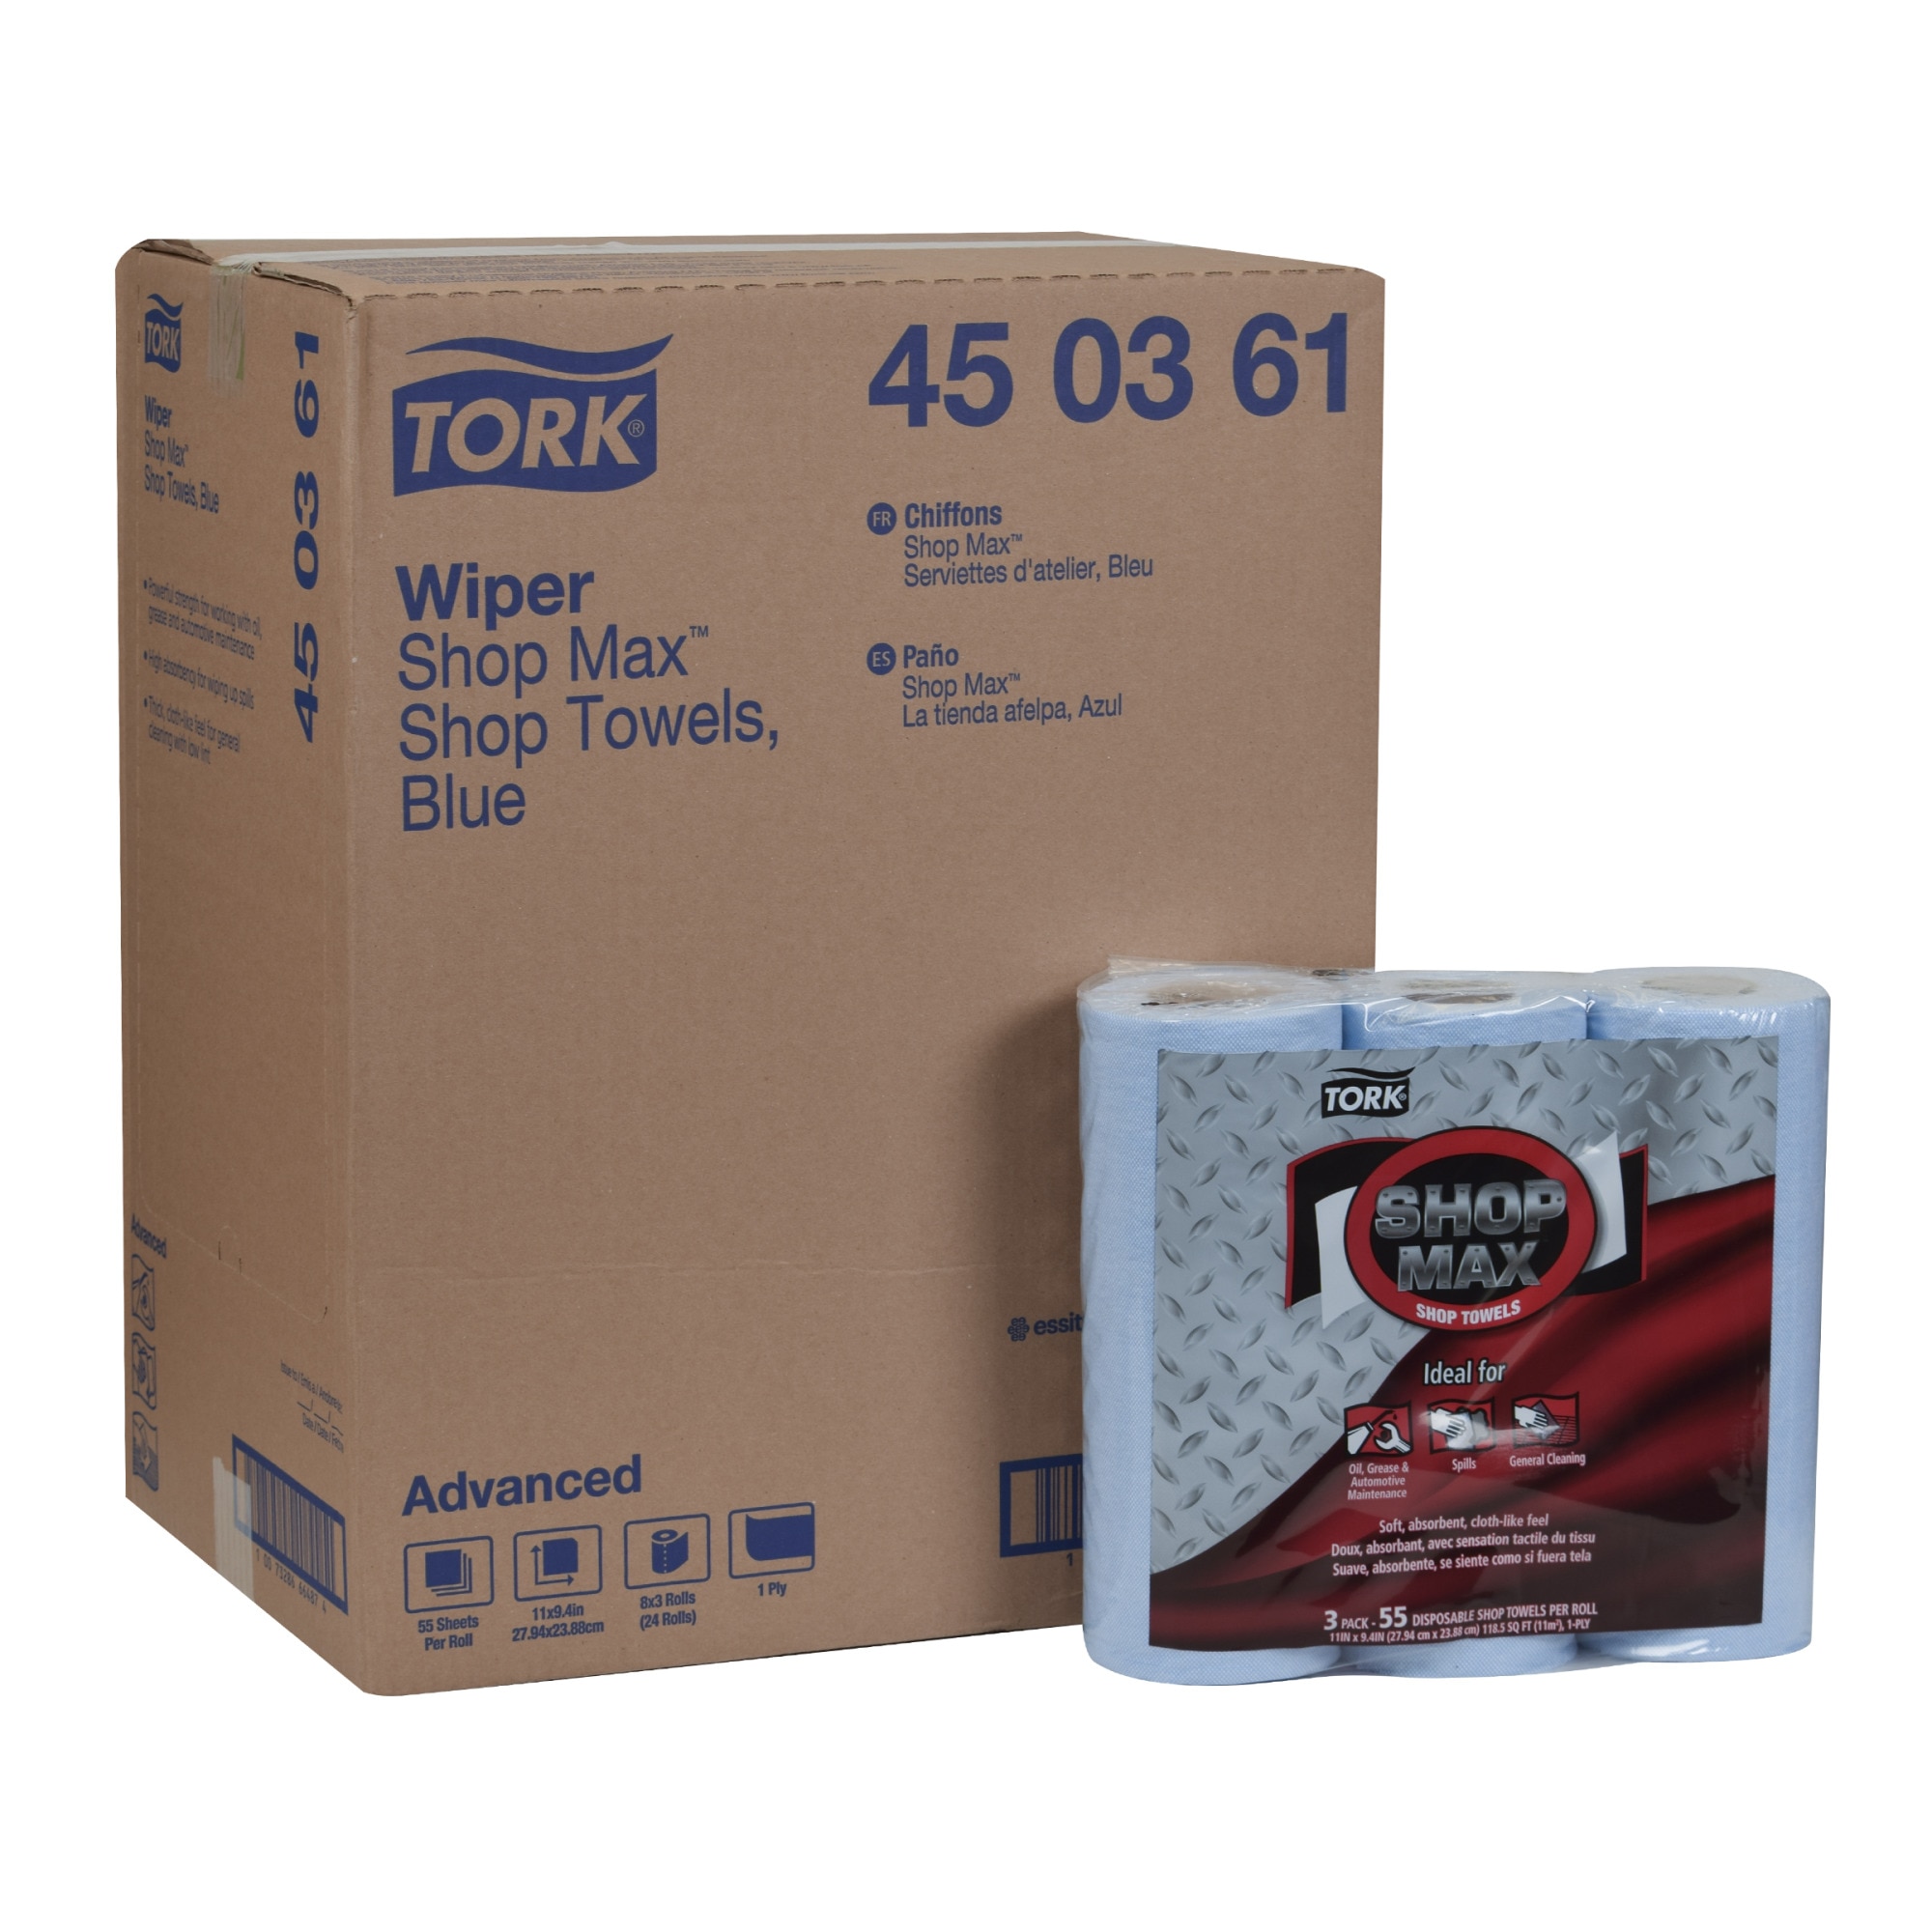 Tork ShopMax Wiper 450, Roll Towel | 450361 | Wipers and cloths 